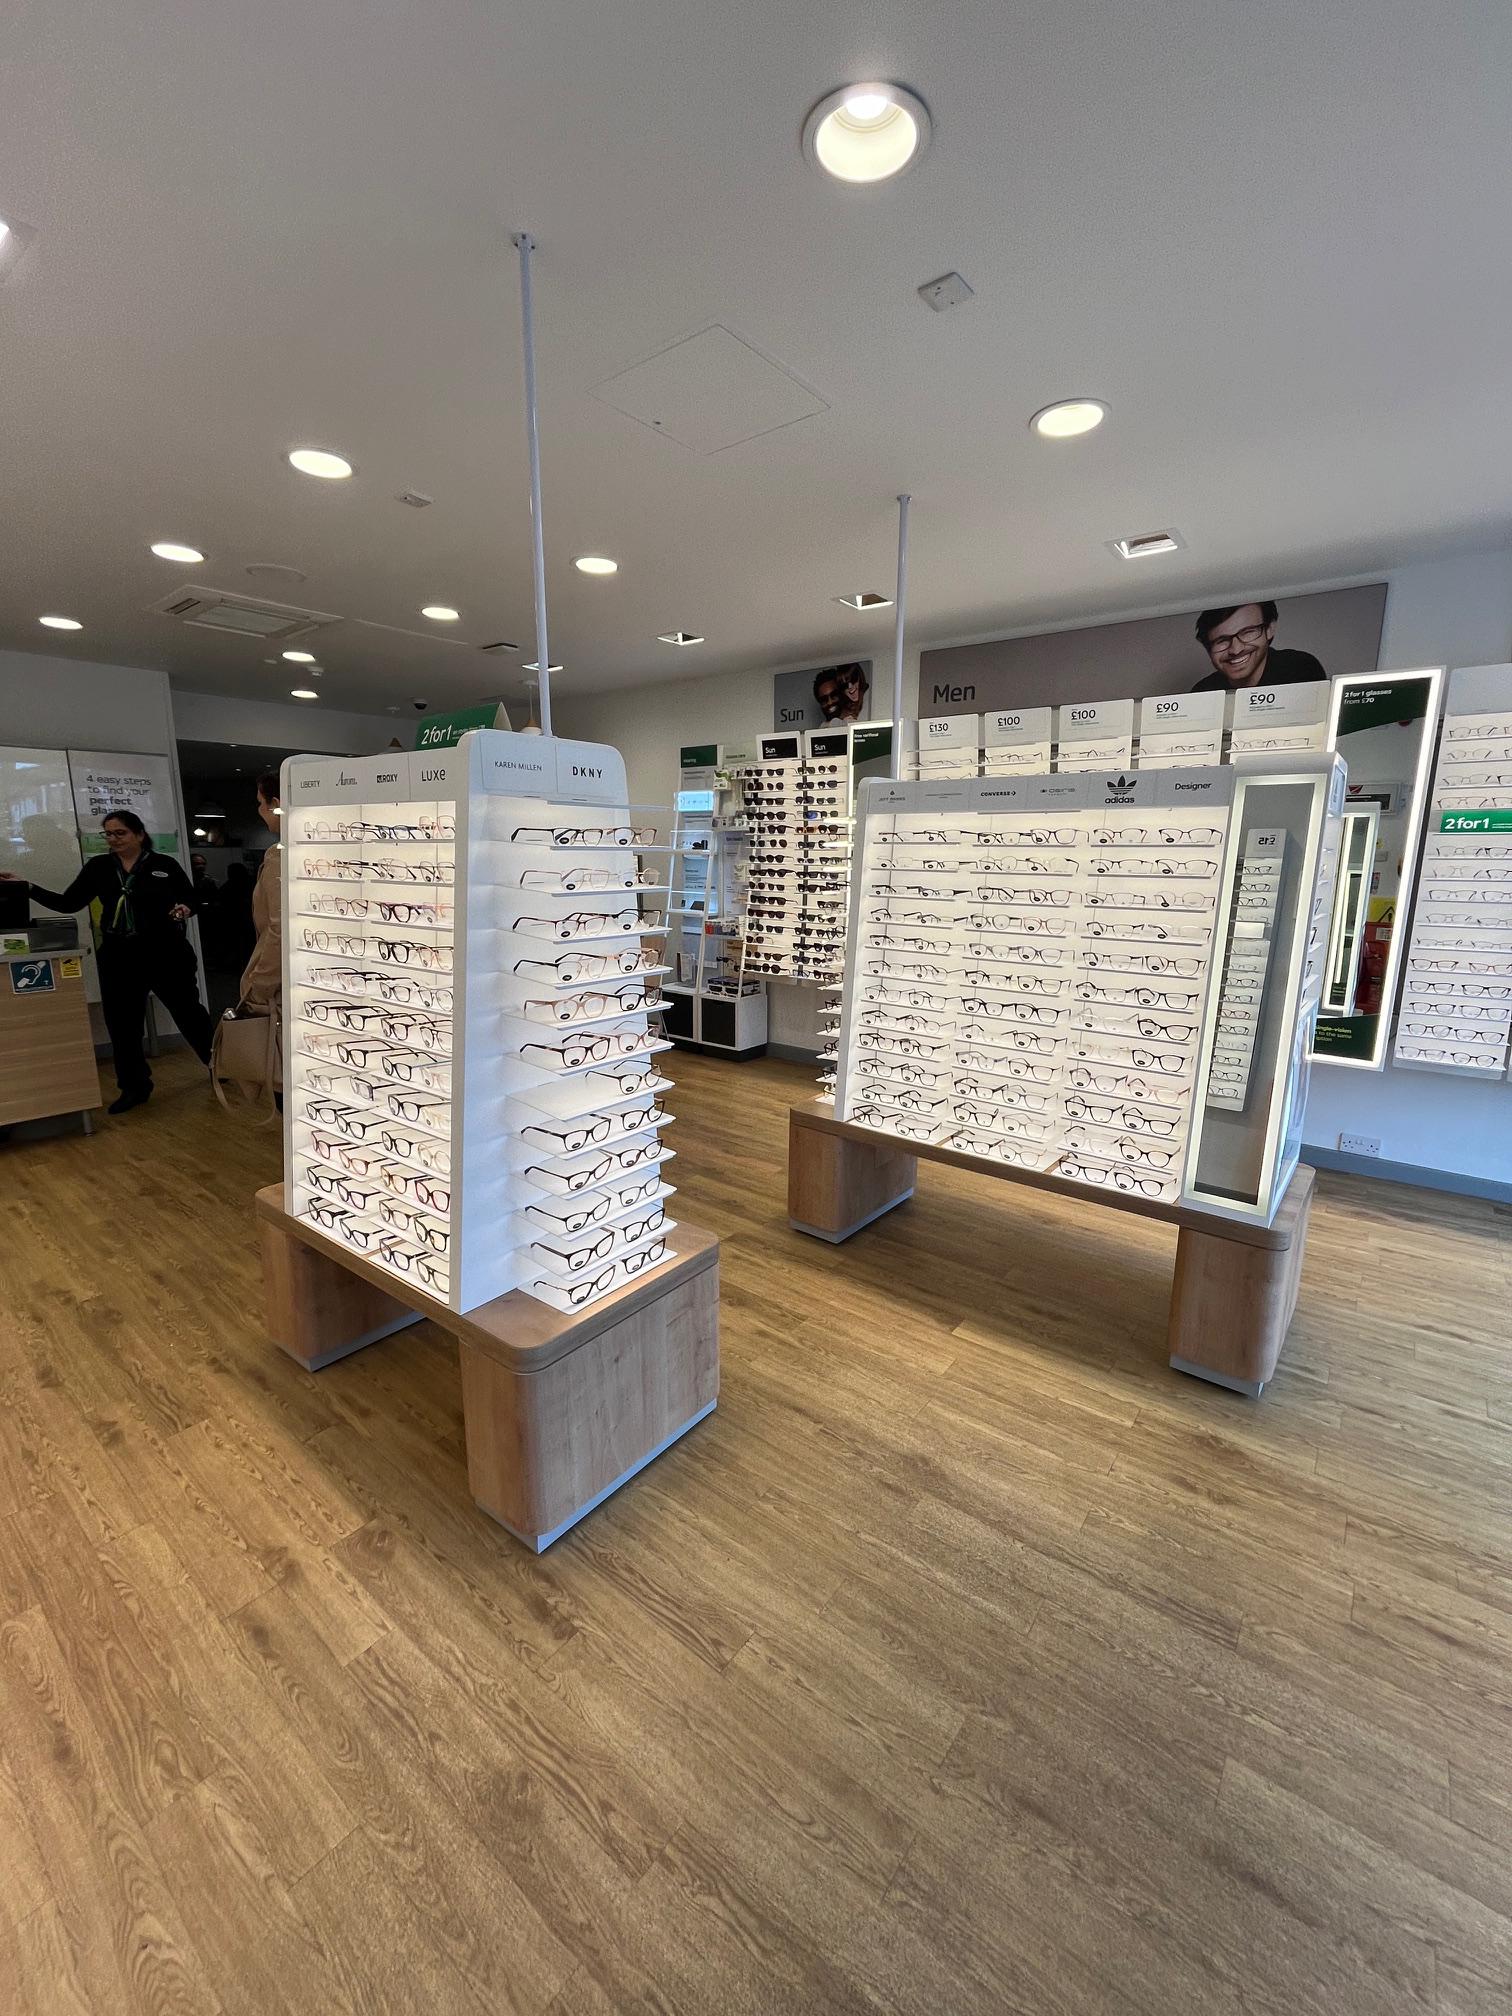 Eastwood Specsavers Specsavers Opticians and Audiologists - Eastwood Nottinghamshire 01773 535777